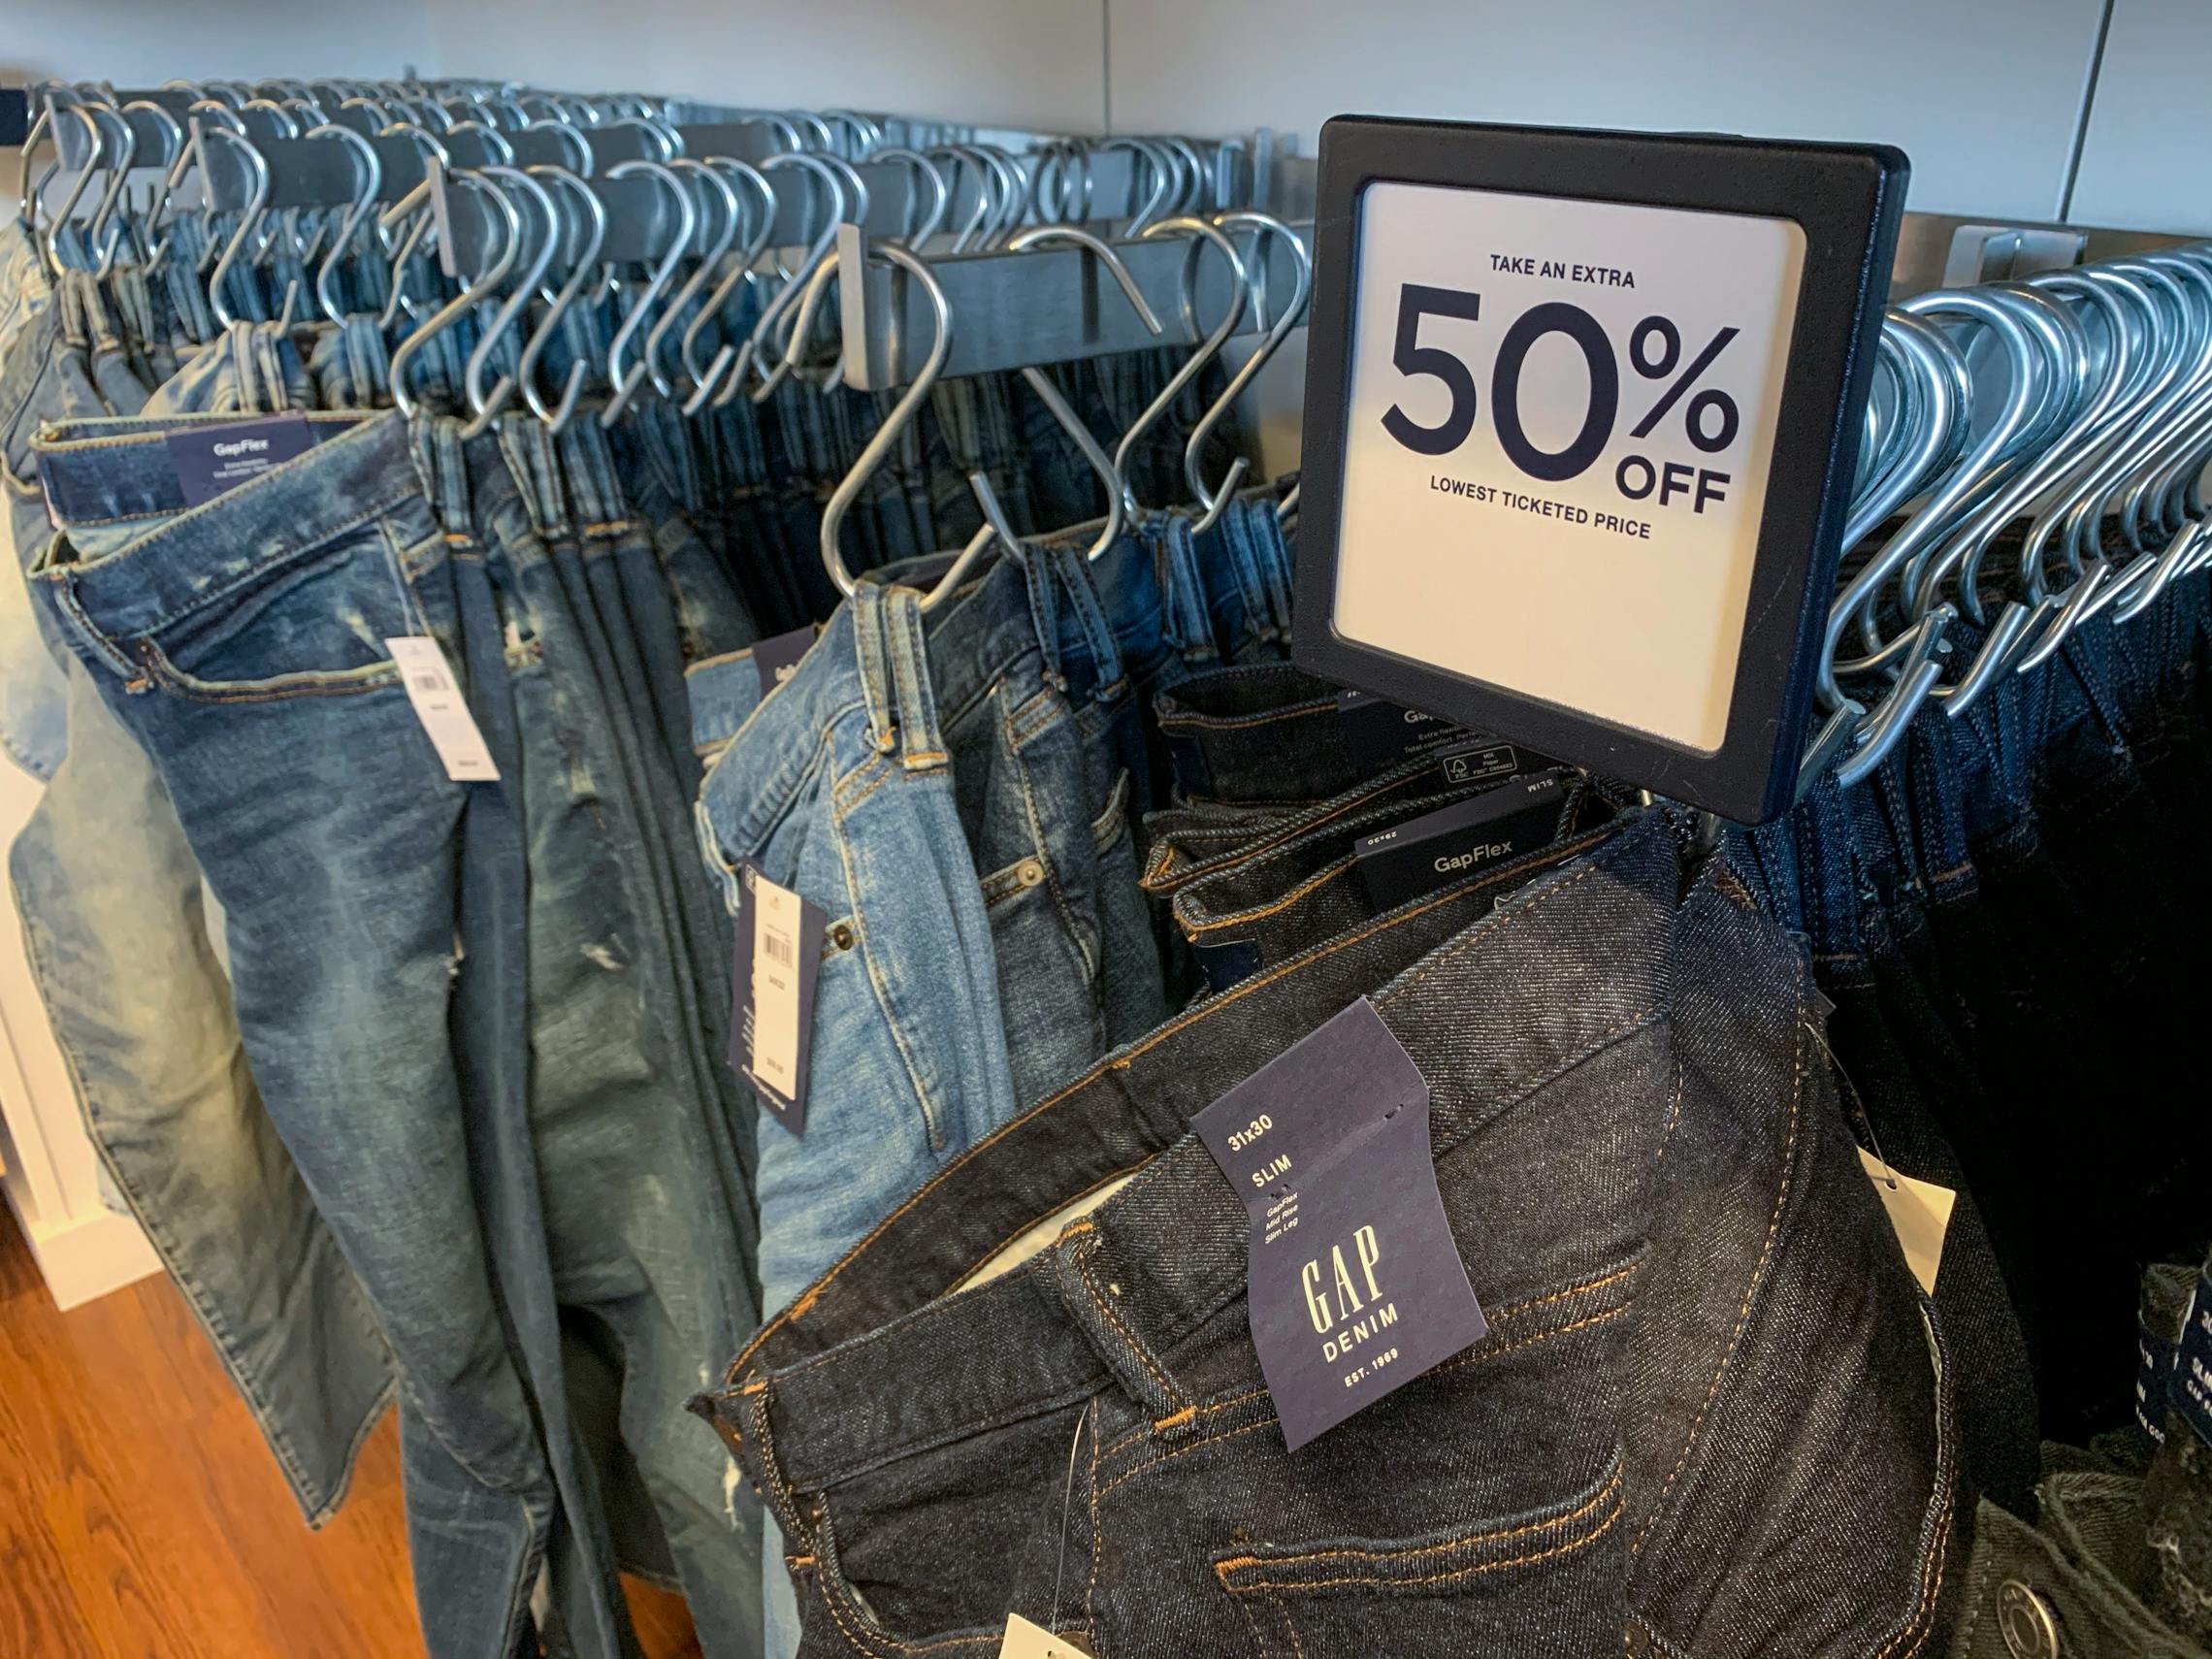 A row of mens demin jeans bellow a sign that say 50% off.